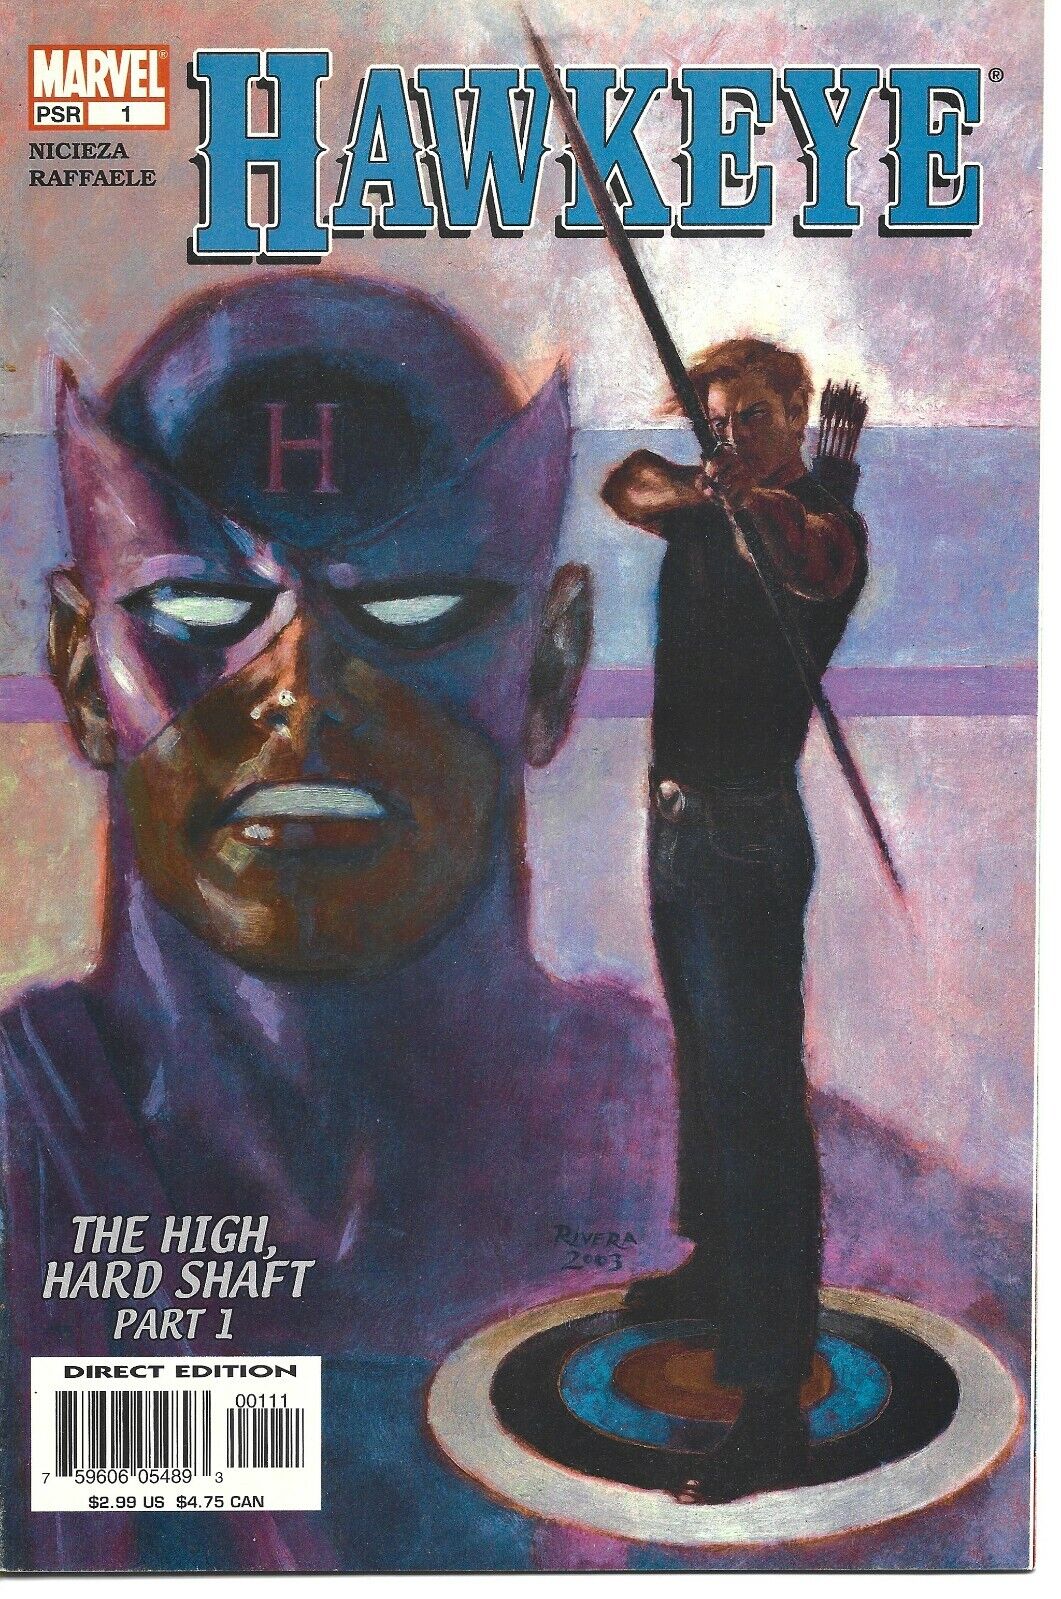 HAWKEYE #1 MARVEL COMICS 2003 BAGGED AND BOARDED